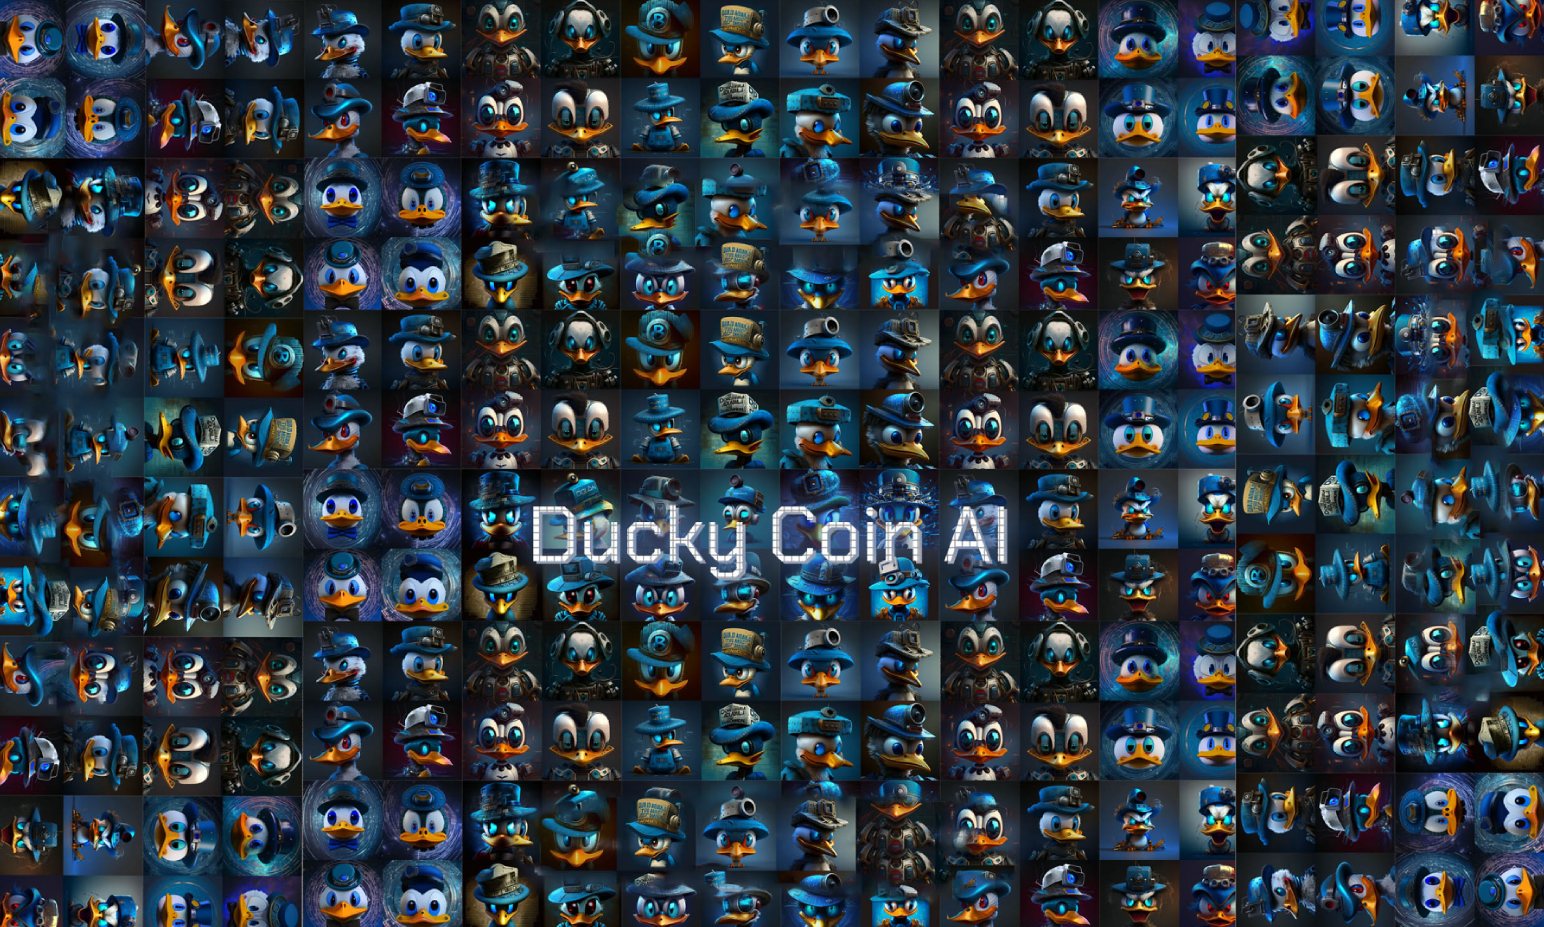  DuckyCoinAI, Tuesday, March 28, 2023, Press release picture